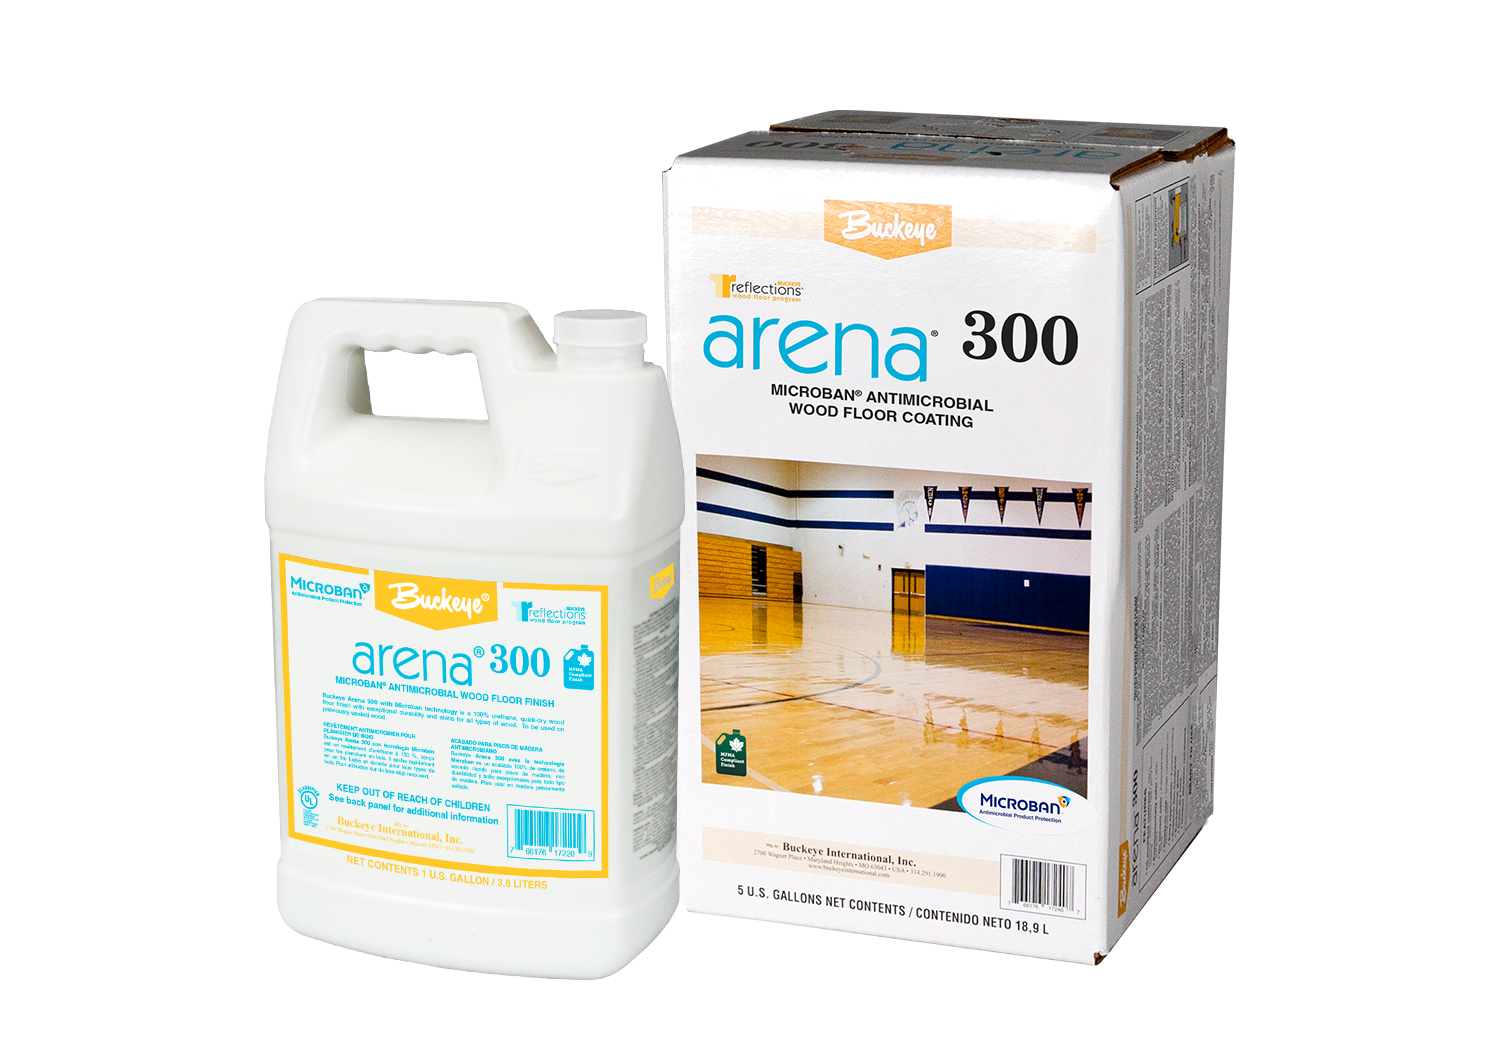 Arena 300 with Microban Technology